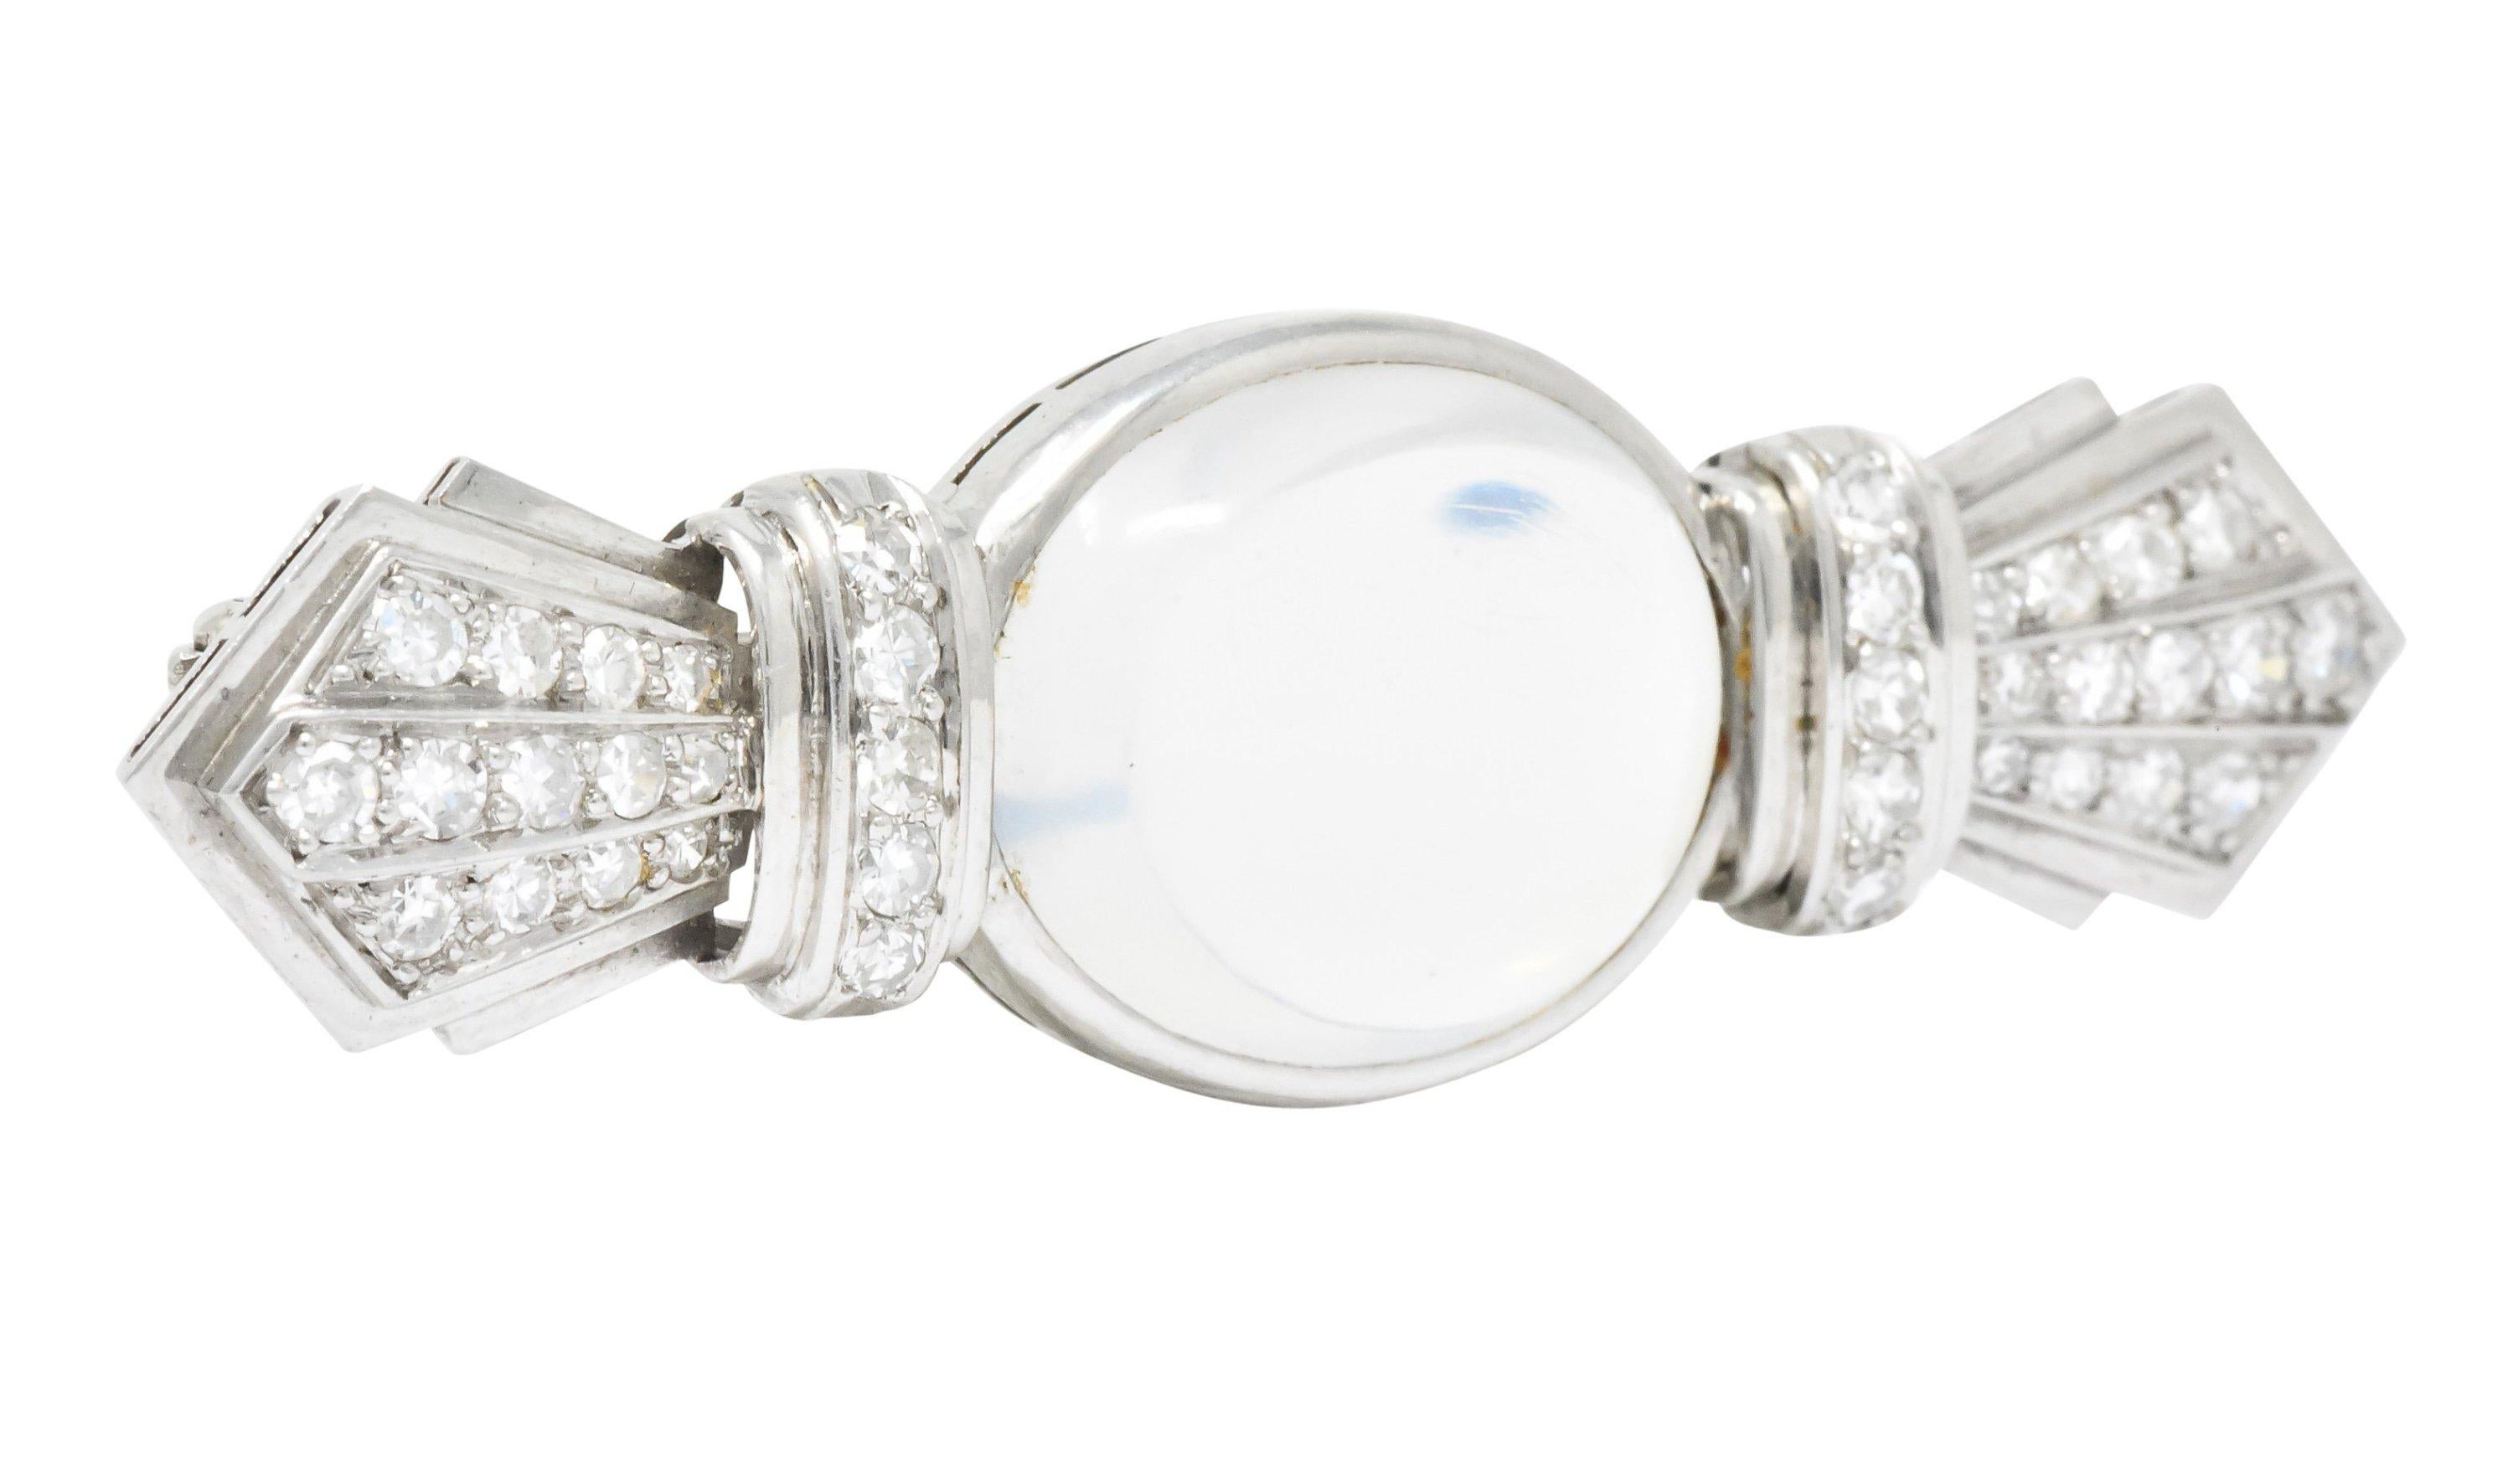 Bar style brooch centering an oval moonstone cabochon measuring 5/8 x 1/2 inch, transparent with moderate blue adularescence

Flanked by two pointed deco forms, accented throughout by rows of single cut diamonds weighing approximately 0.70 carat,